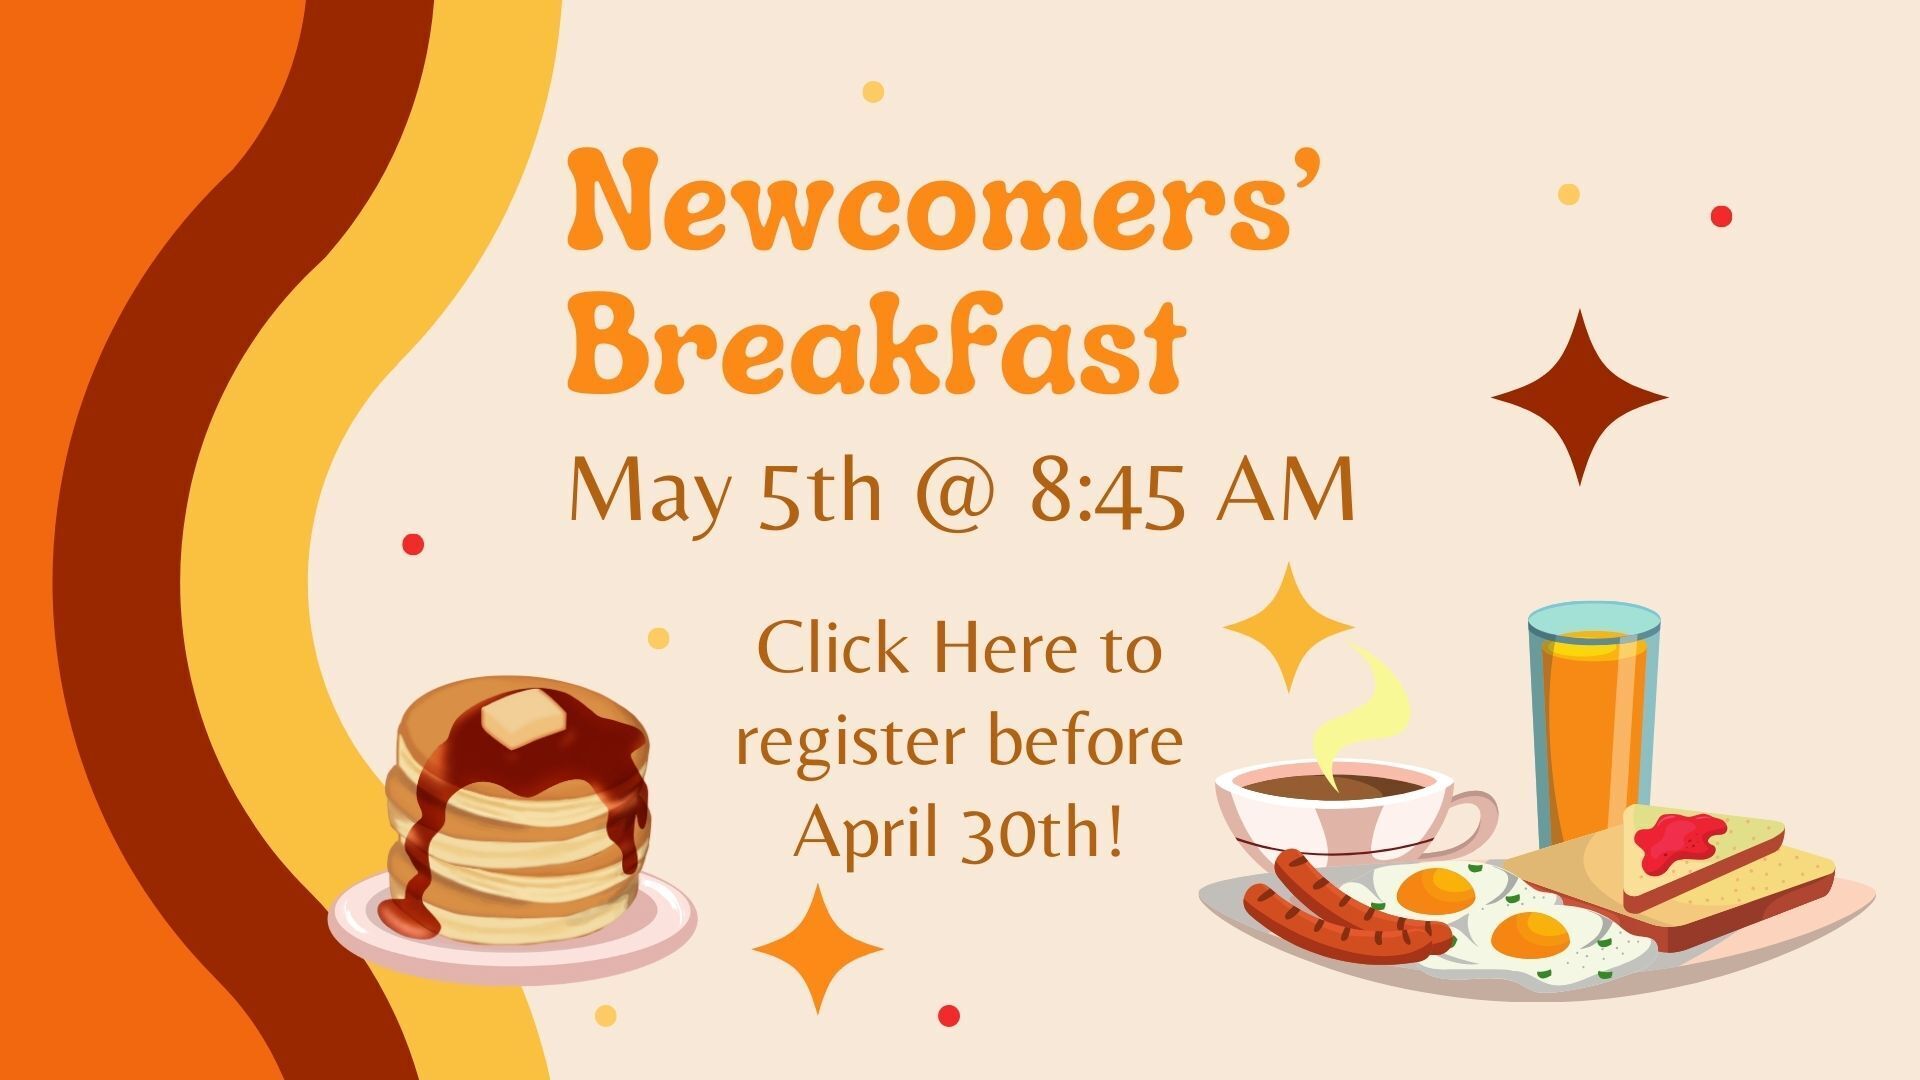 Newcomers' Breakfast on May 5th